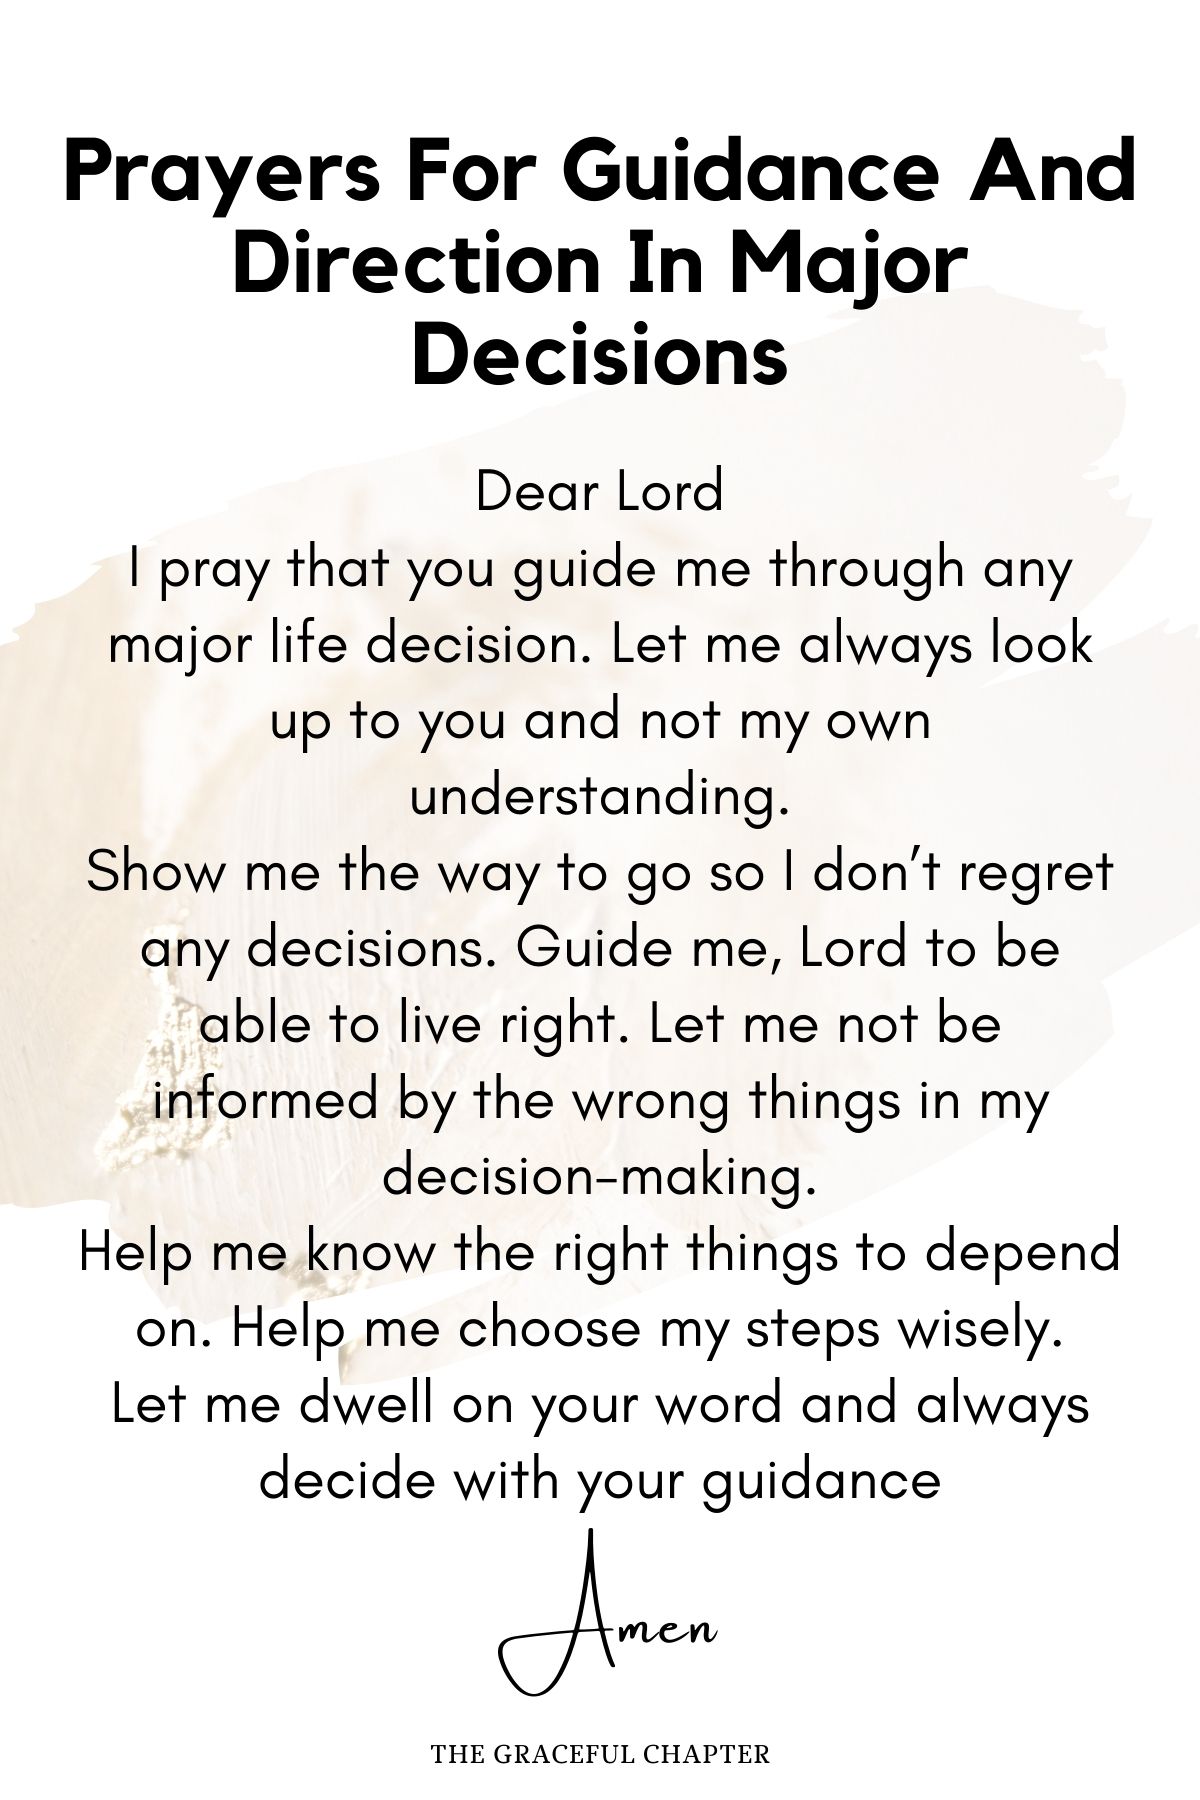 Prayers for guidance and direction in major decisions